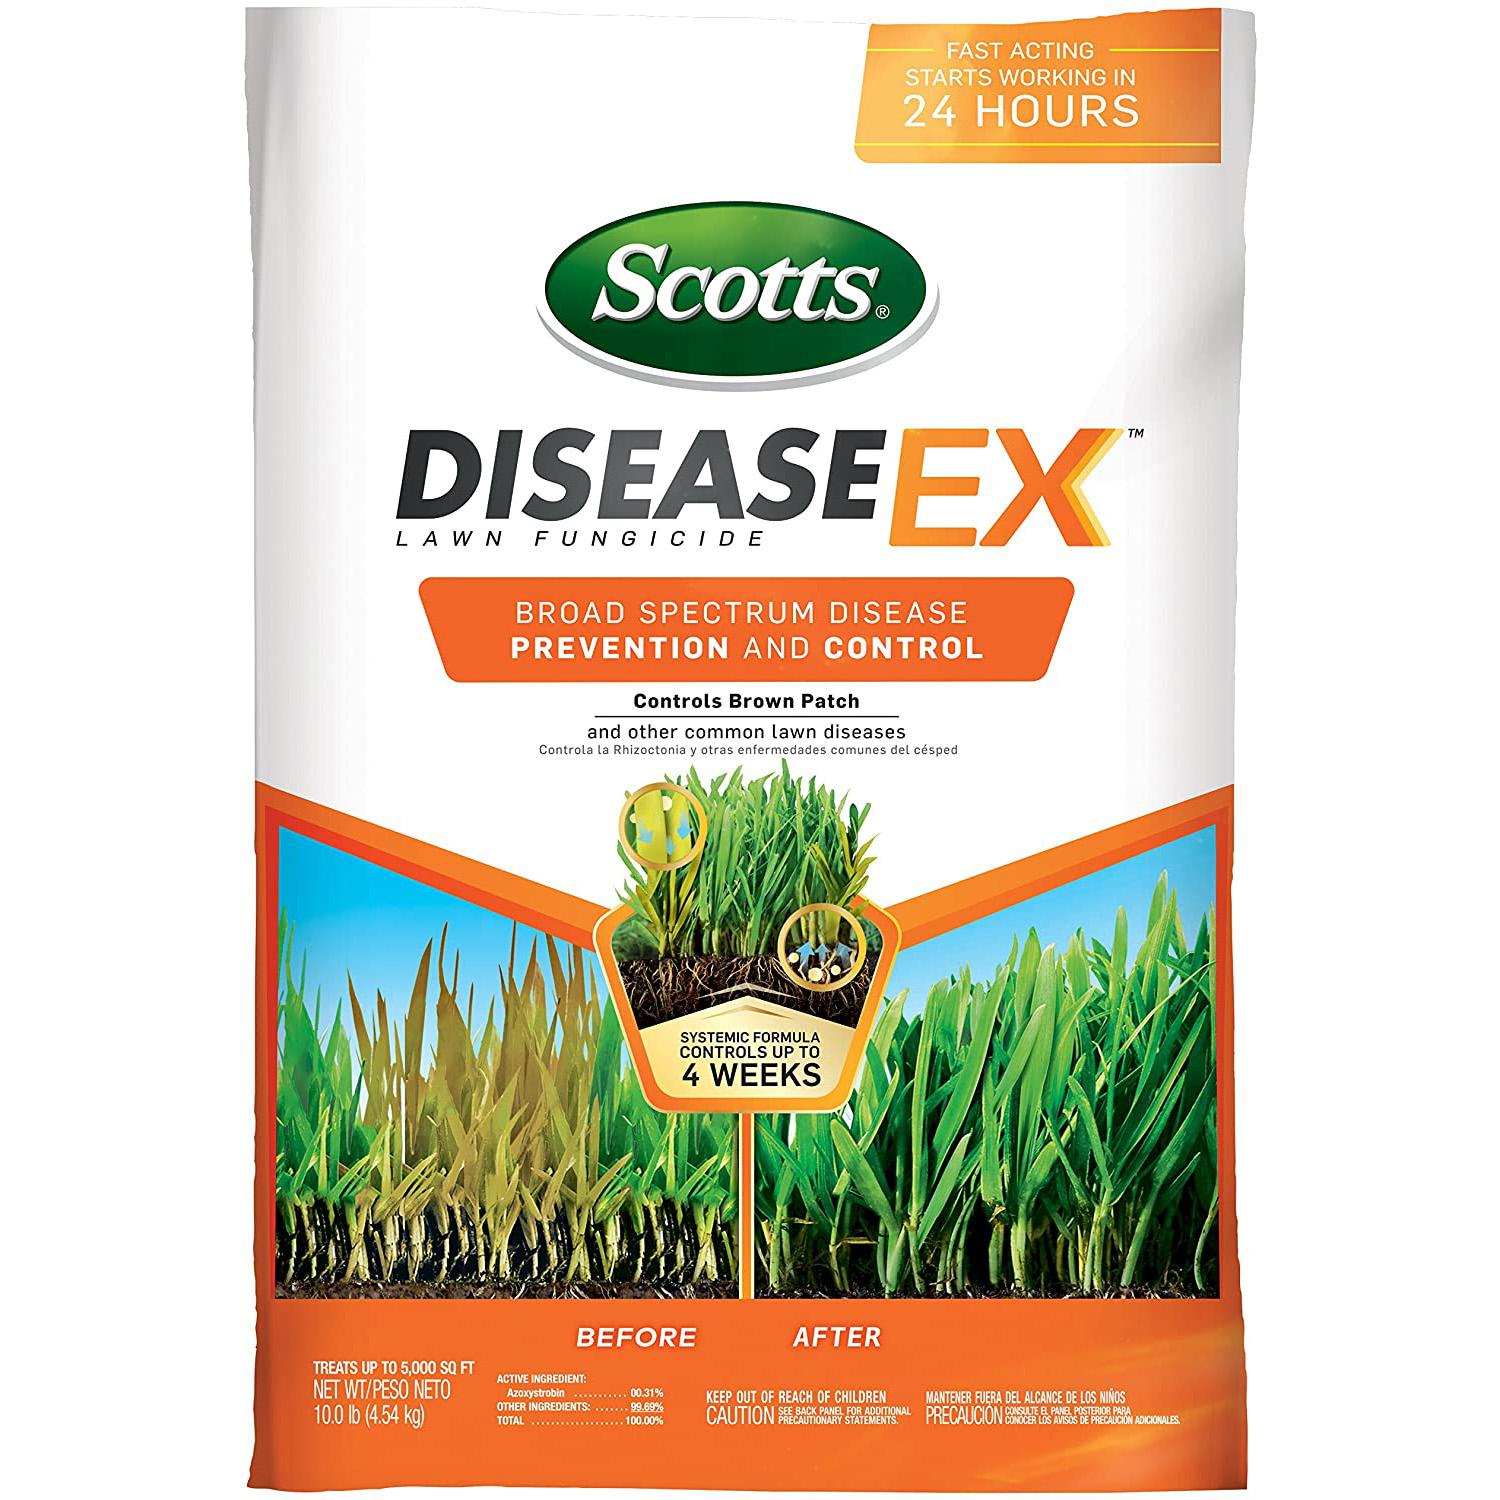 10lb Scotts DiseaseEx Lawn Fungicide for $12.96